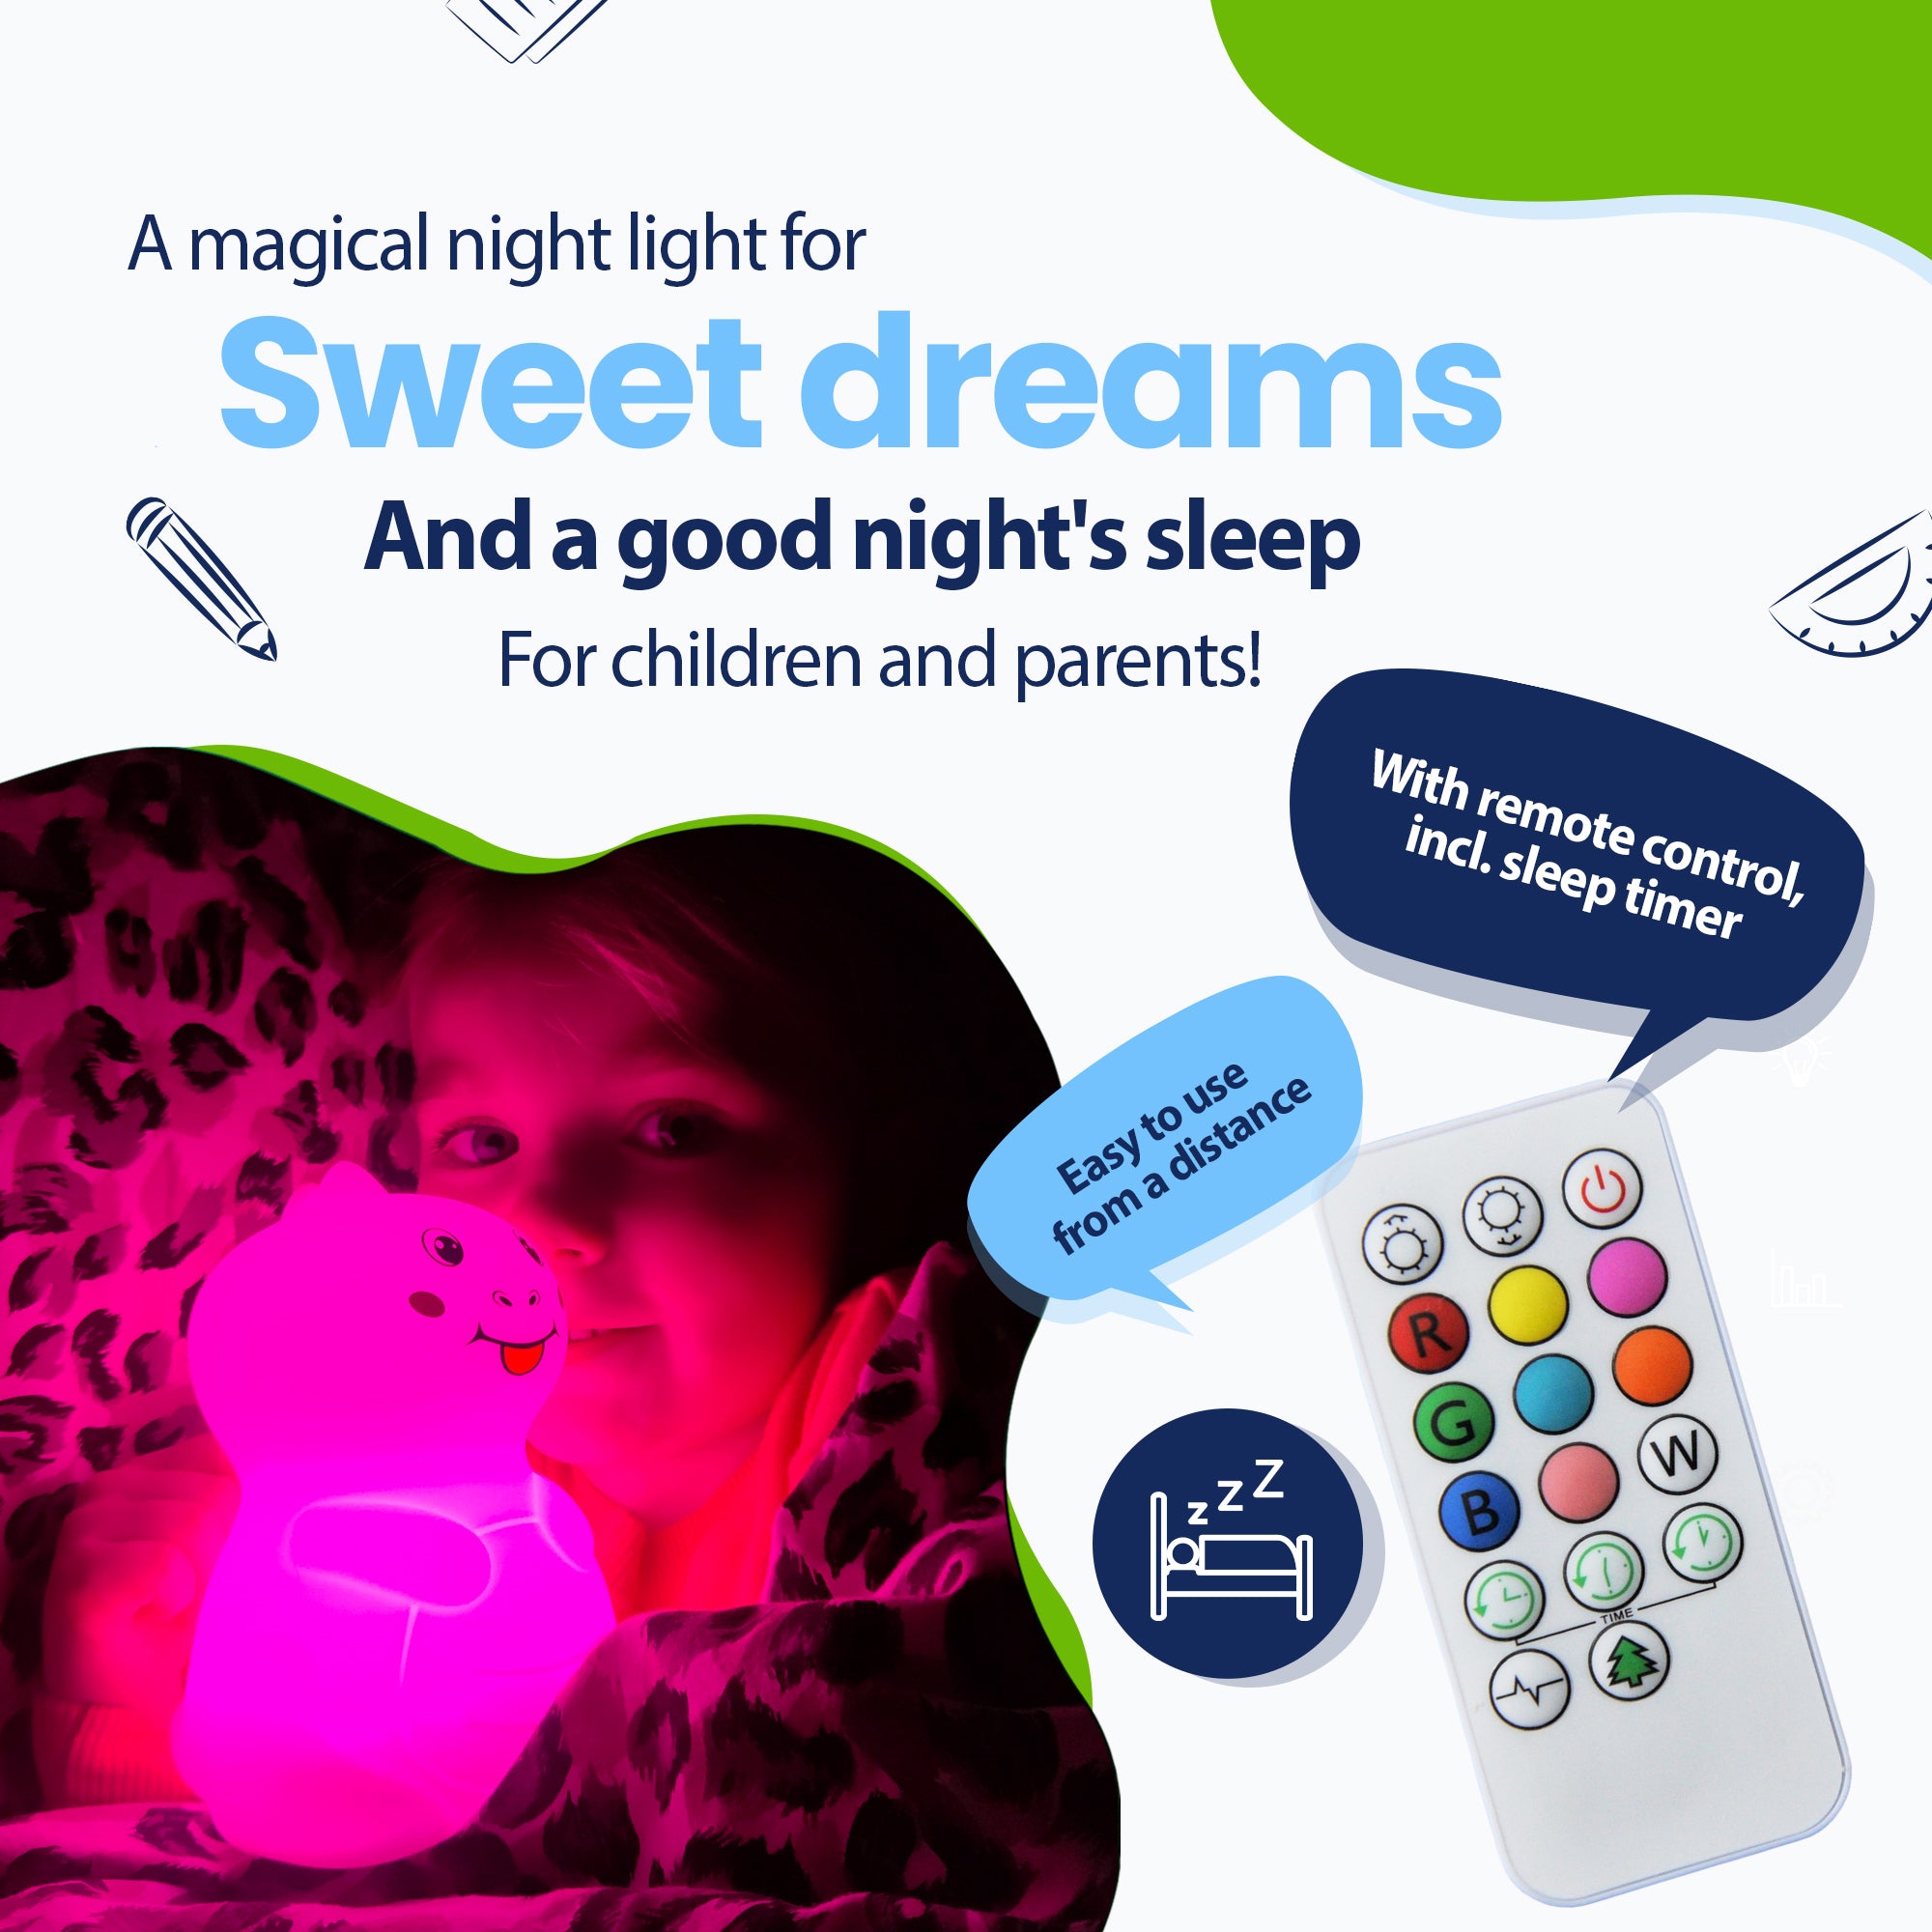 A magical night light for pleasant dreams and a healthy night's sleep for children and parents - with remote control including sleep timer - easily from a distance